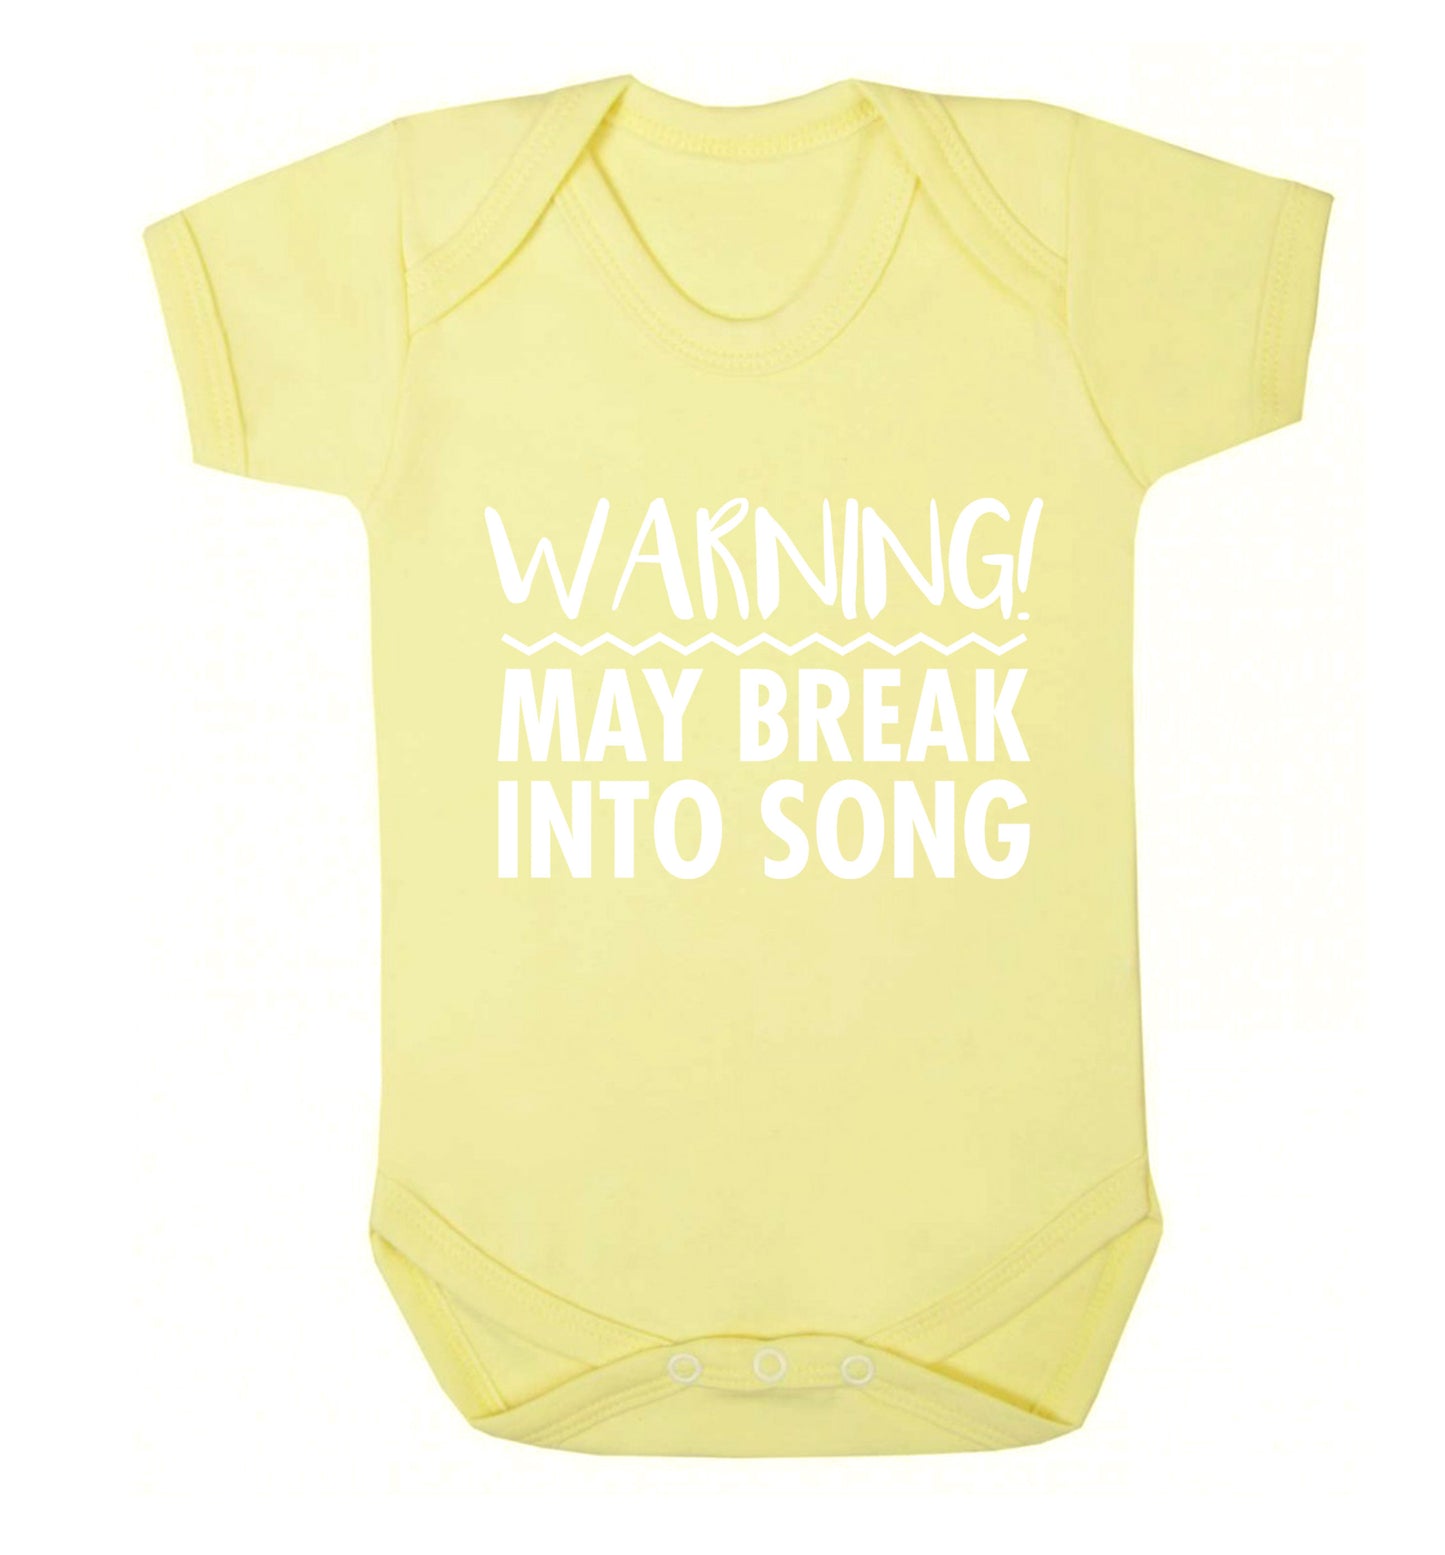 Warning may break into song Baby Vest pale yellow 18-24 months